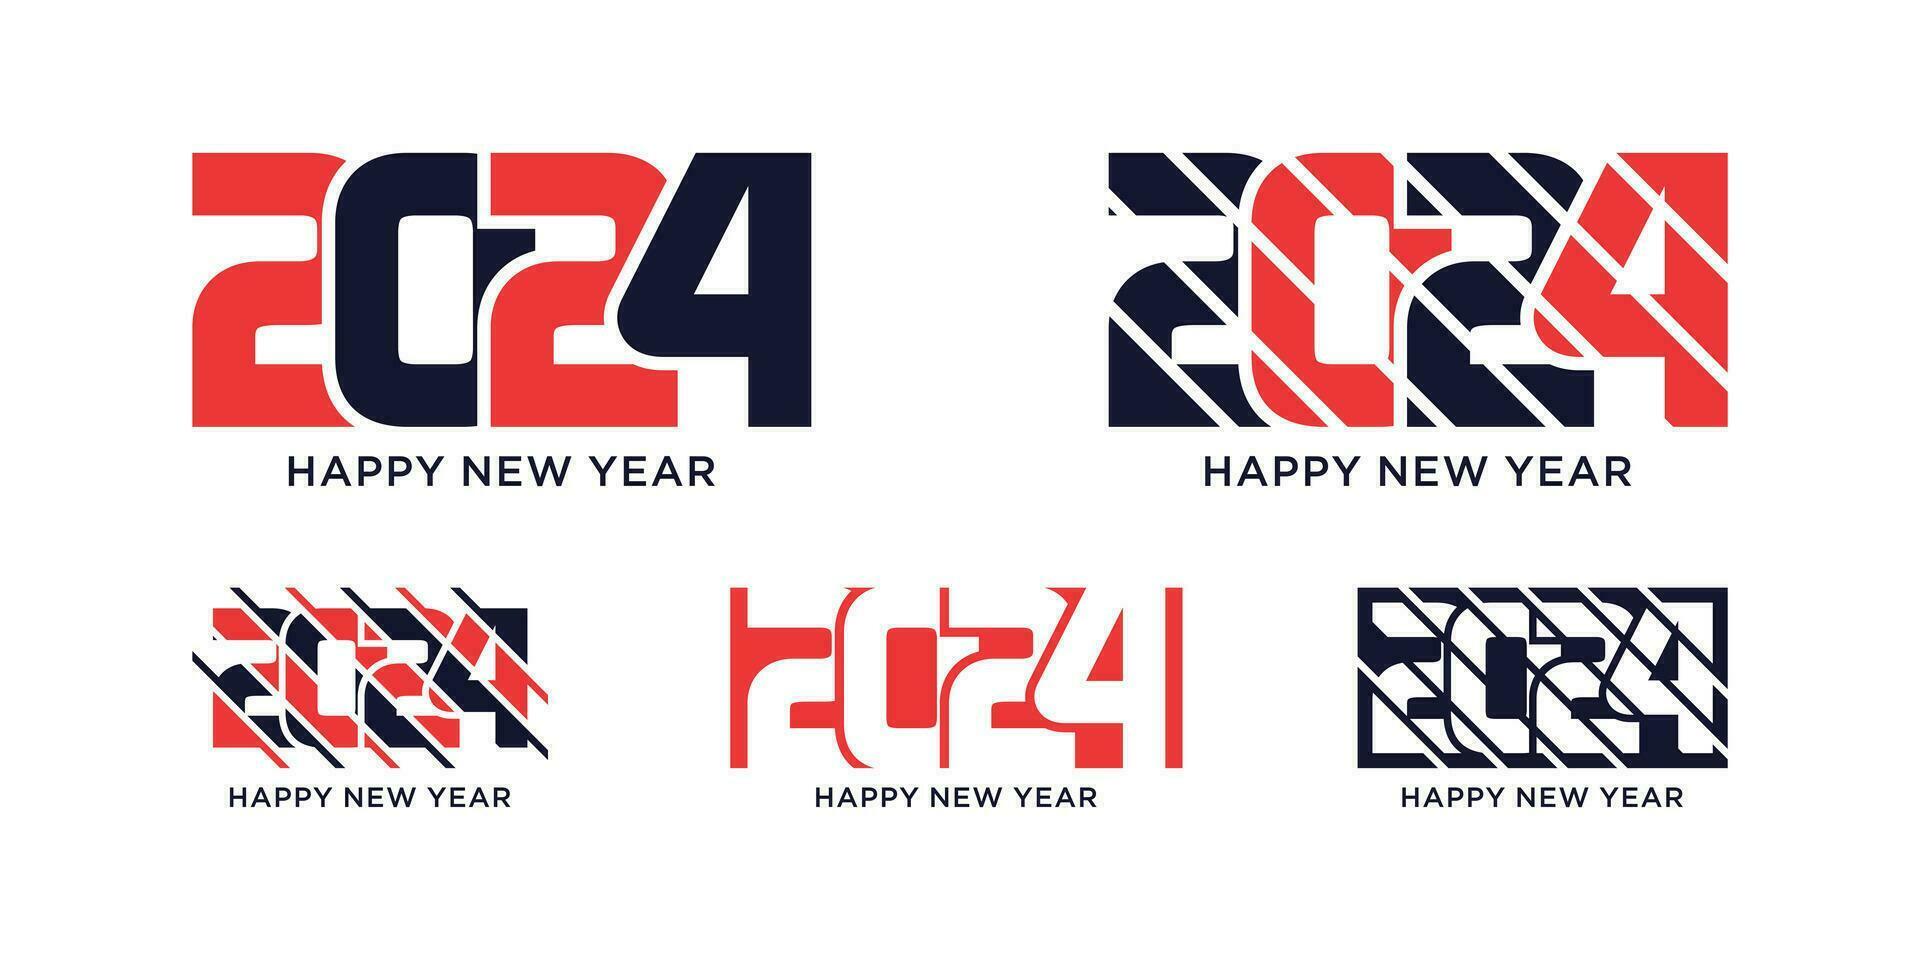 2024 happy new year logo design template vector illustration with unique modern concept